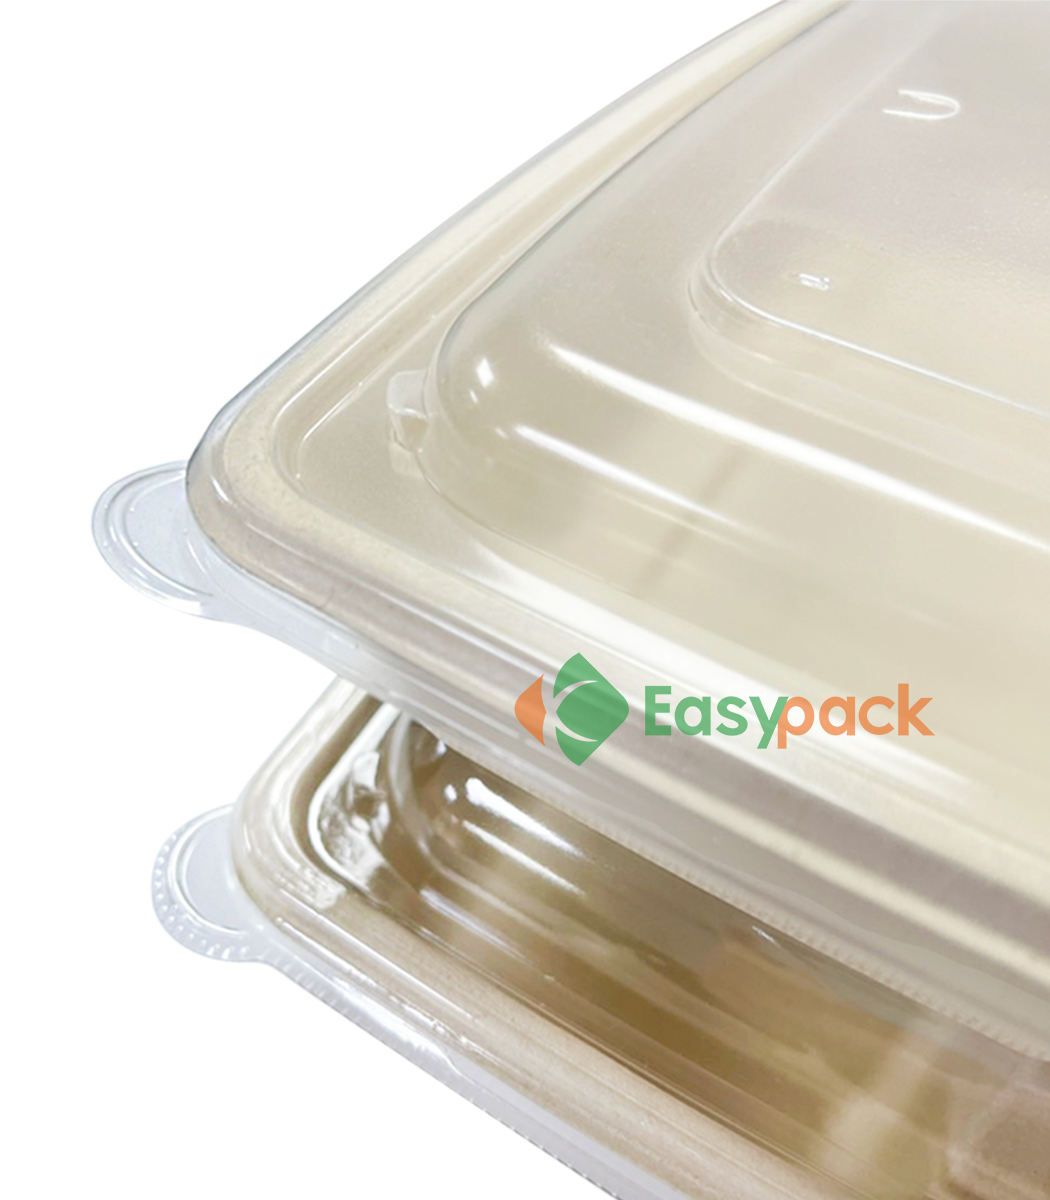 Eco-Products 32 oz. Rectangular Deli Container w/ Lid